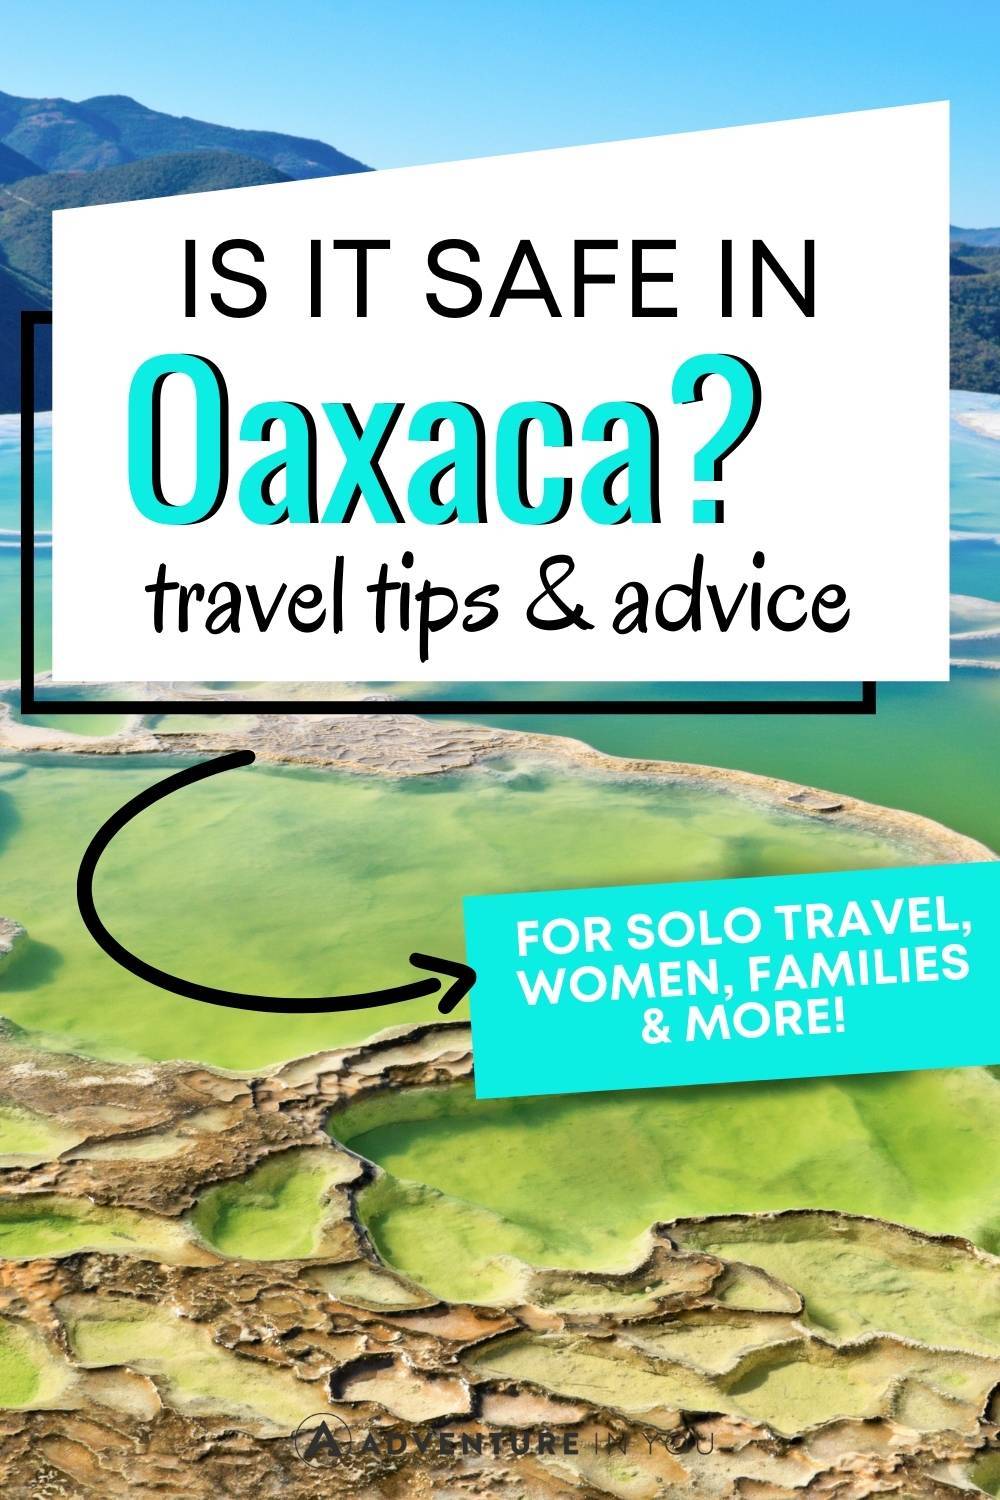 Is Oaxaca Safe? | Looking for tips for safety around Oaxaca, Mexico? Check out our full guide featuring safety for solo travelers, families, and more. #oaxacamexico #mexico